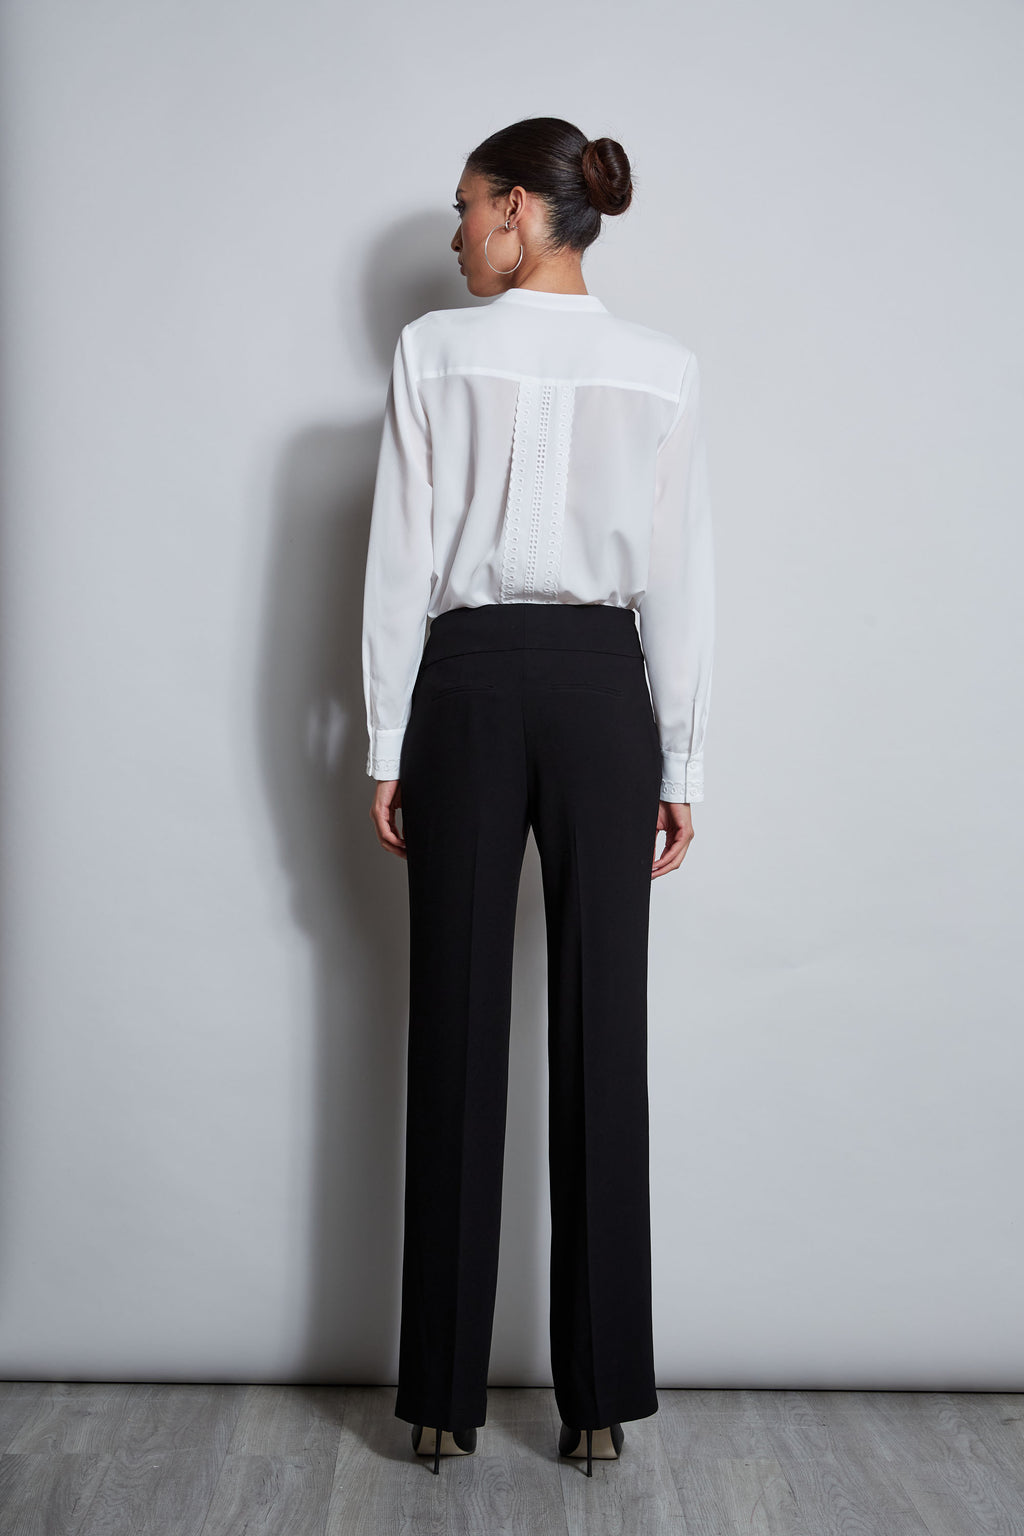 Lace Embroidered Shirt – Elie Tahari